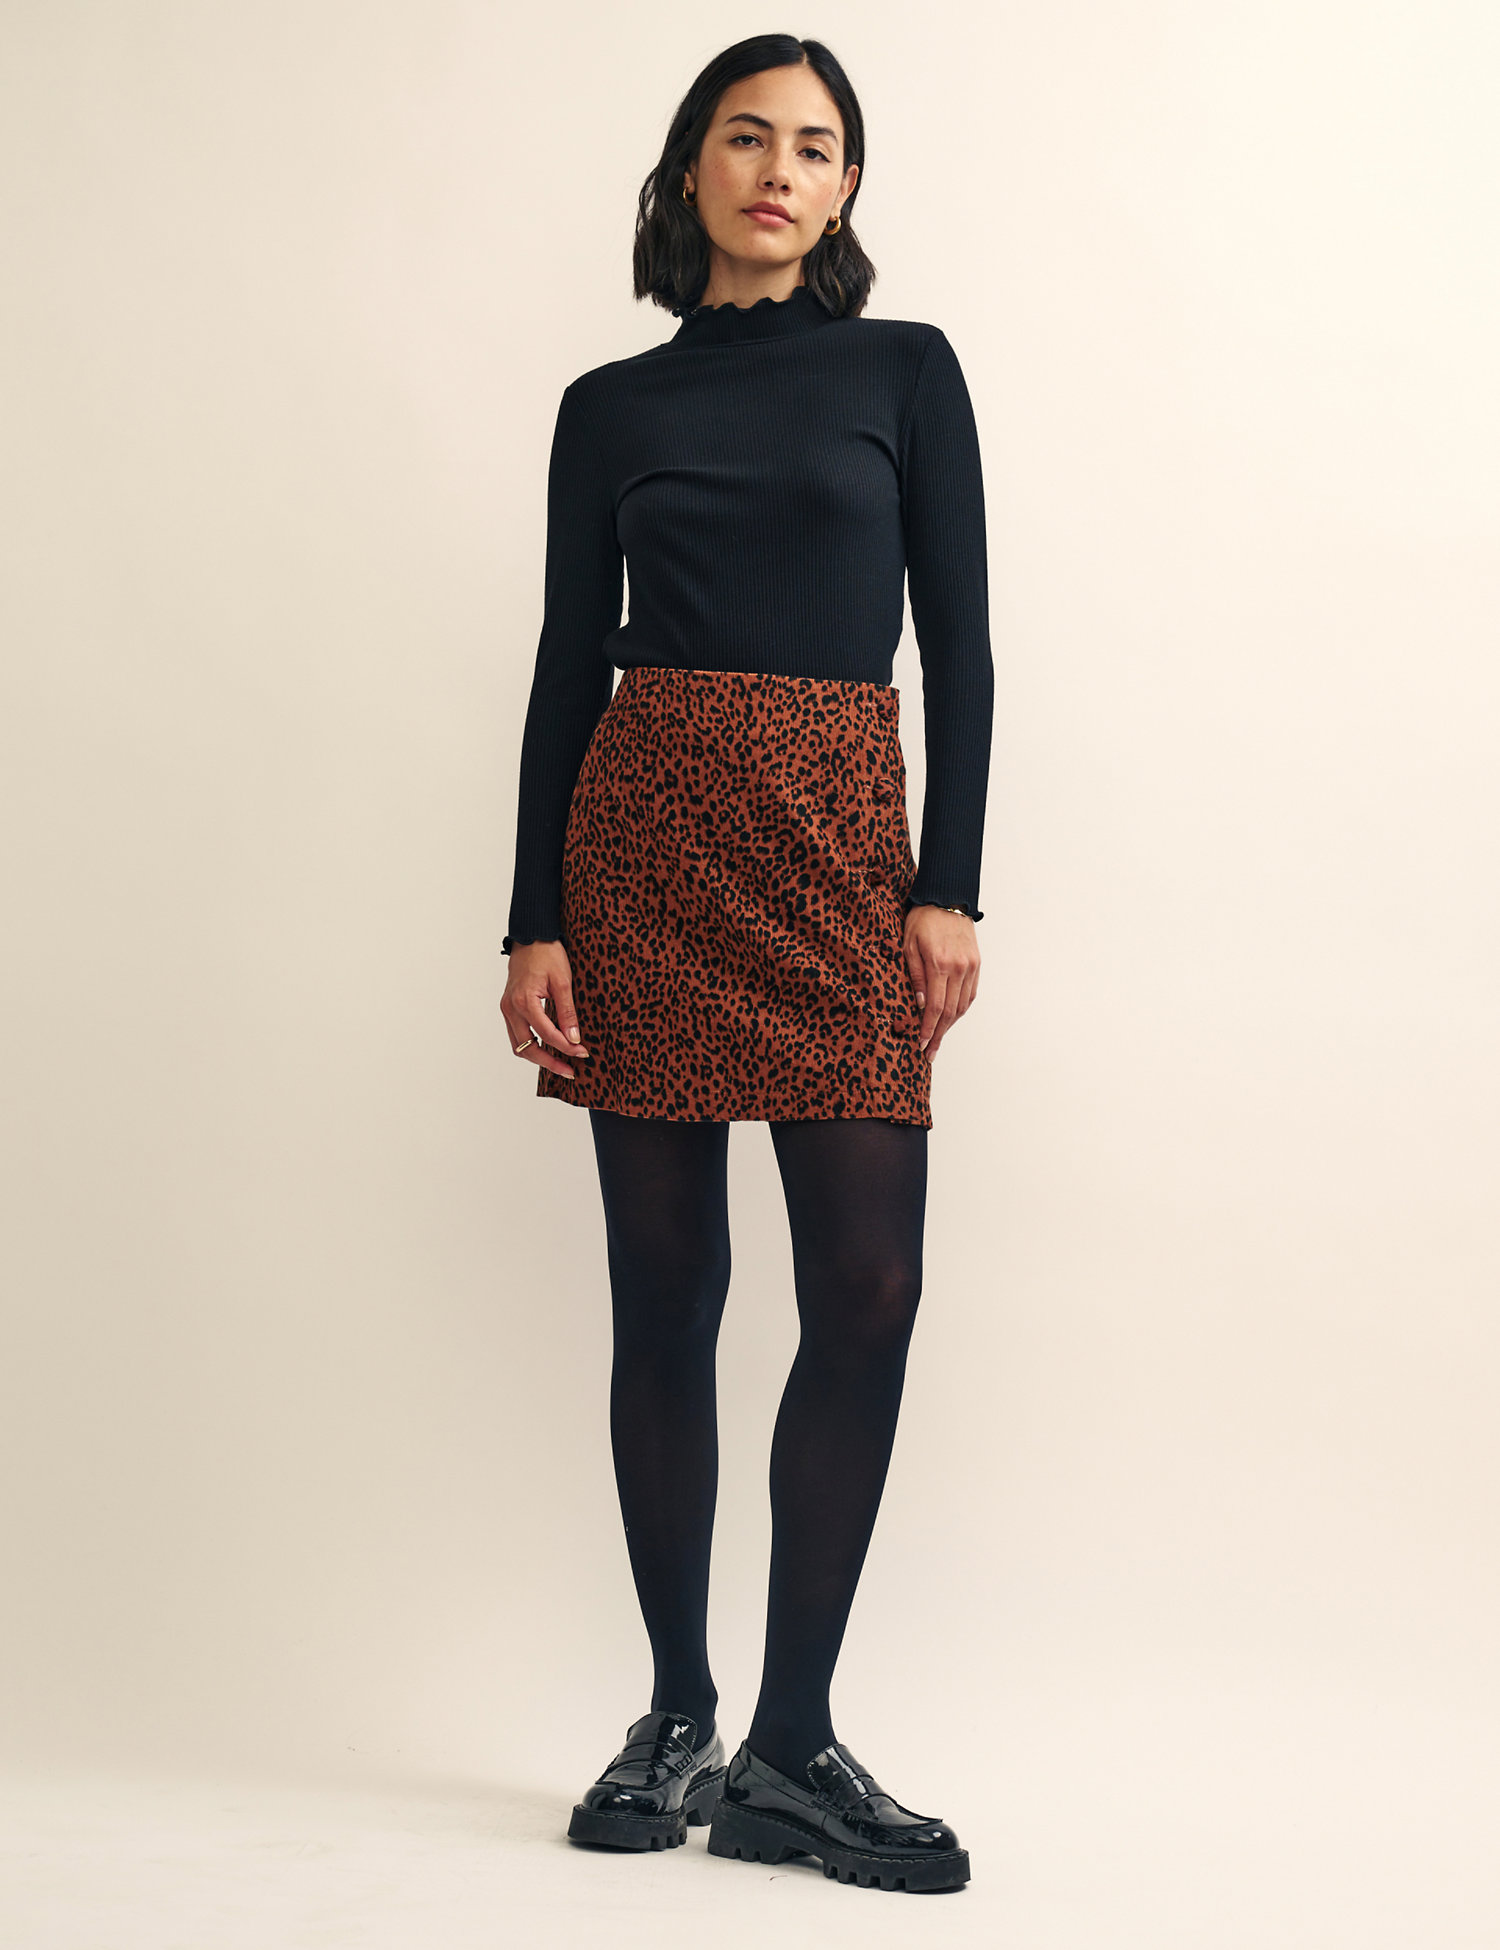 This Nobody's Child mini skirt is crafted from soft organic cotton, with a super fine cord texture. It has a flattering A-line shape that skims your figure and fastens with discreet buttons. The detailed leopard print gives a distinctive finish. Nobody’s Child designs are cut to a form-fitting shape, so if you're looking for a more relaxed fit, we recommend choosing the next size up.

